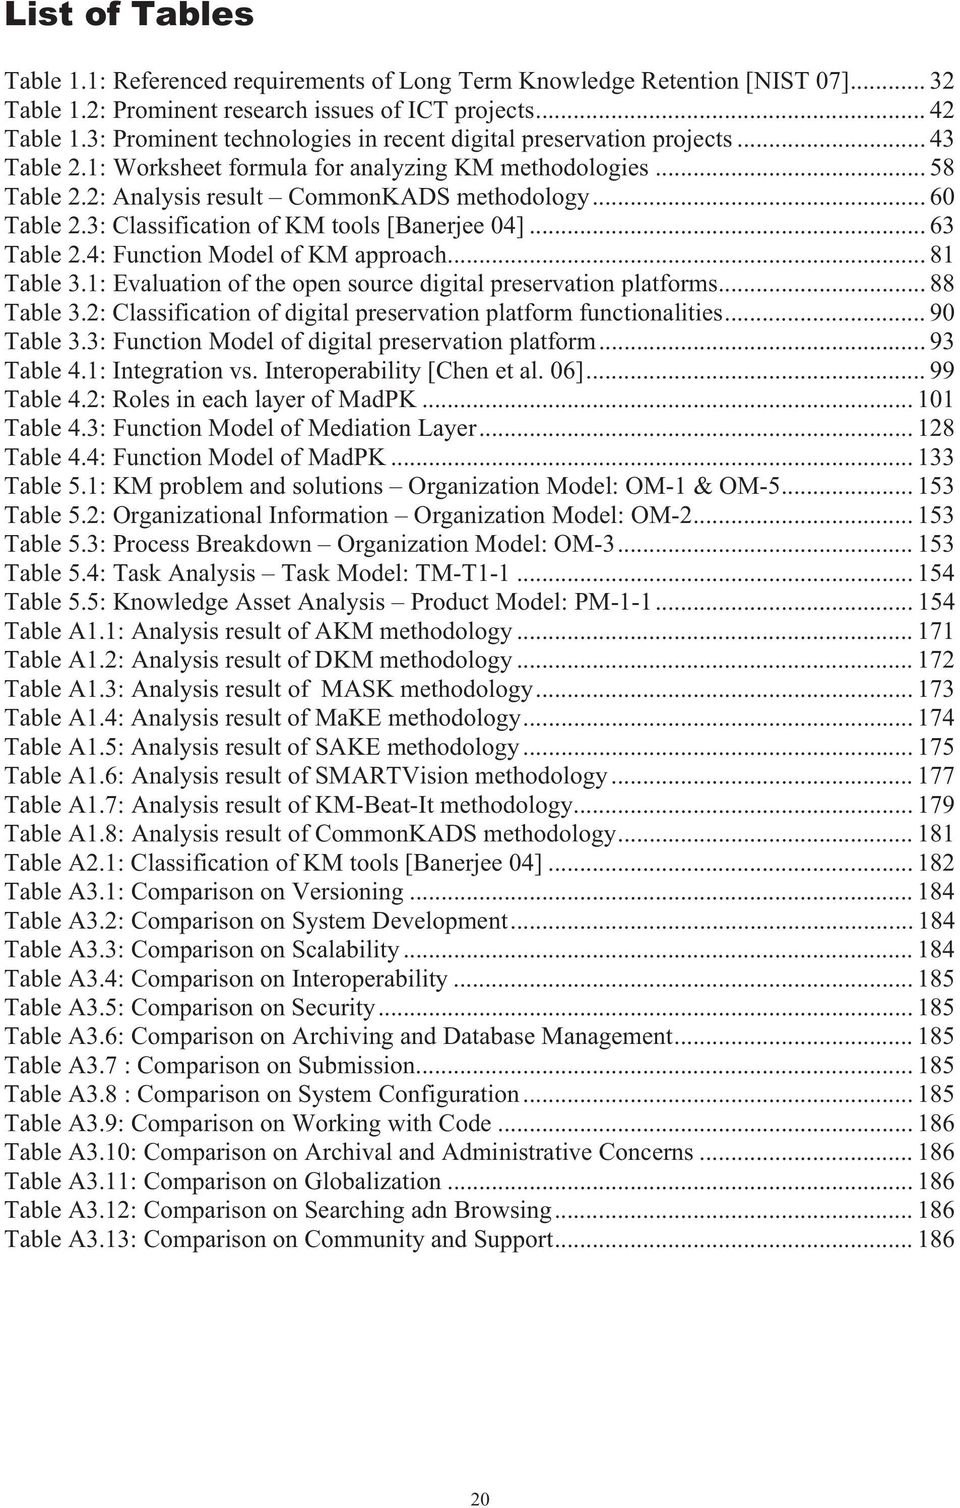 3: Classification of KM tools [Banerjee 04]... 63 Table 2.4: Function Model of KM approach... 81 Table 3.1: Evaluation of the open source digital preservation platforms... 88 Table 3.